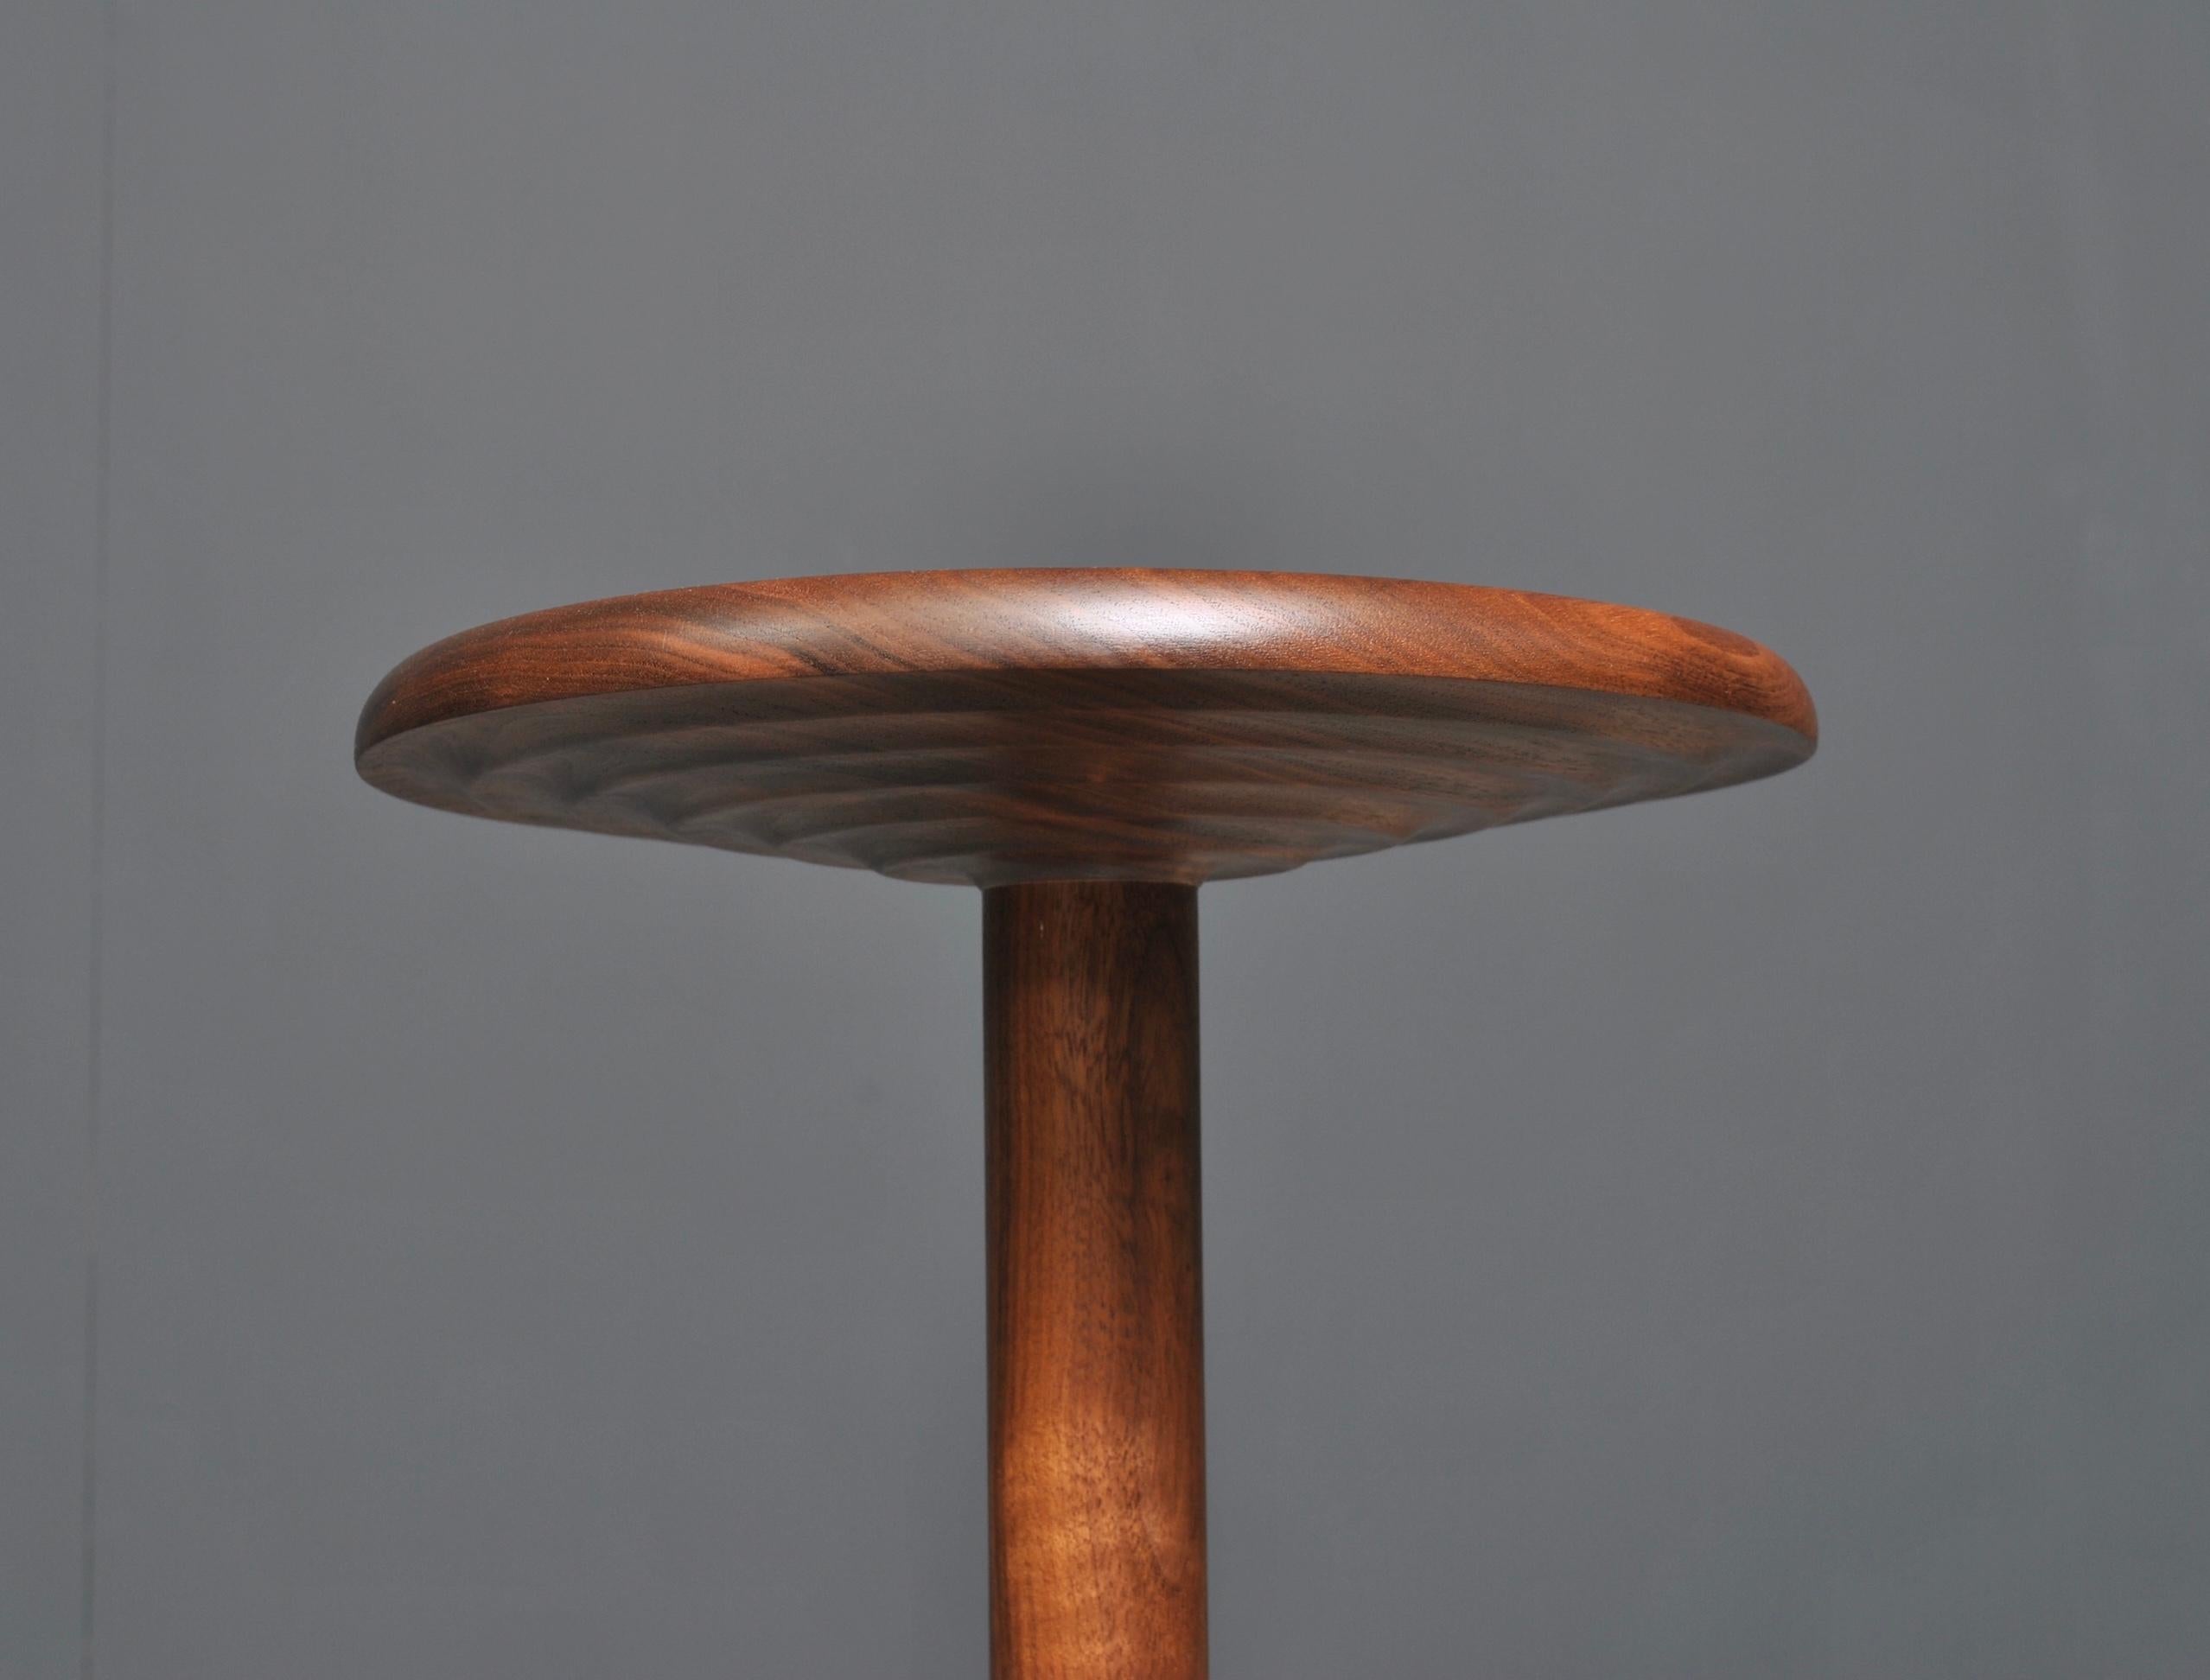 Hand-Crafted Handcrafted Walnut Modernist Side Table